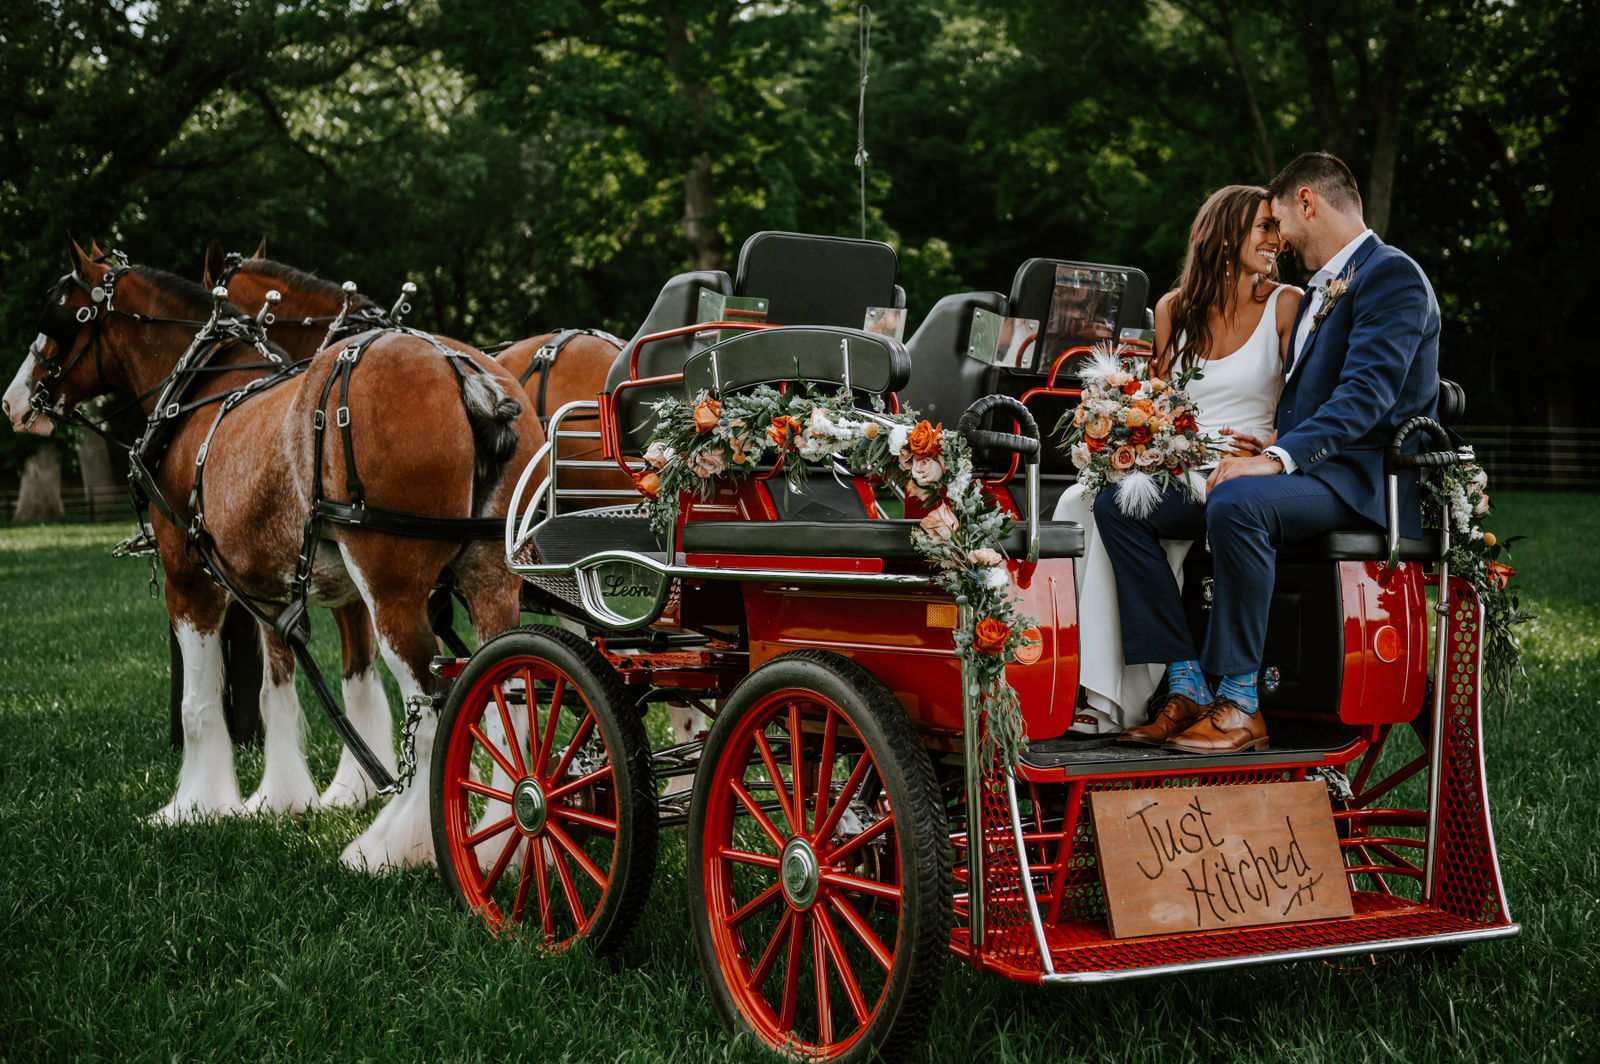 Bride and groom on a horse drawn carriage with a just hitched sign on it.